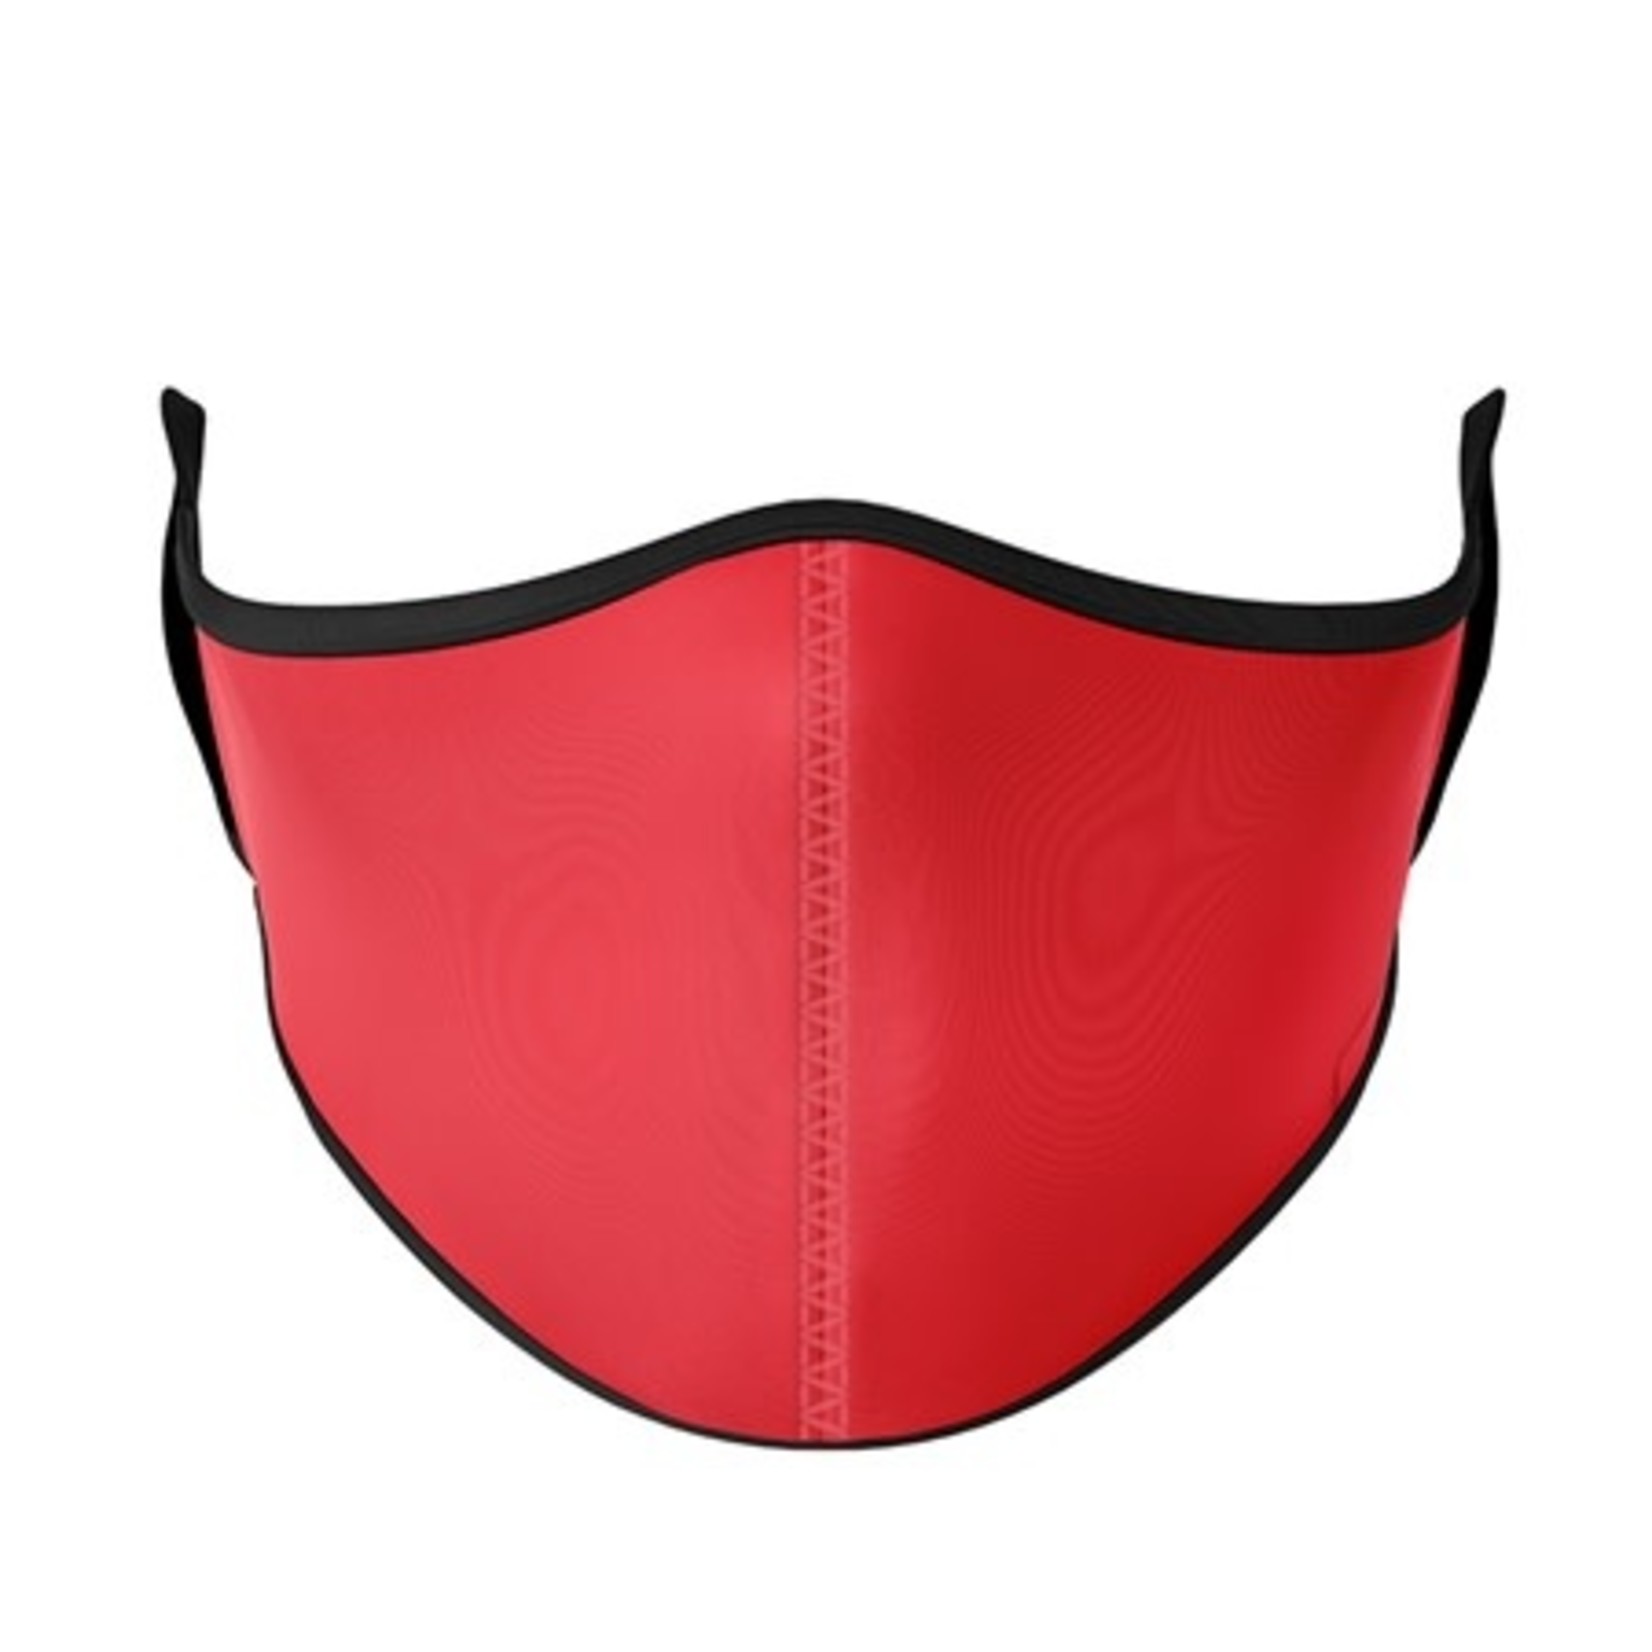 Top Trenz Reusable Face Mask - Solid Color